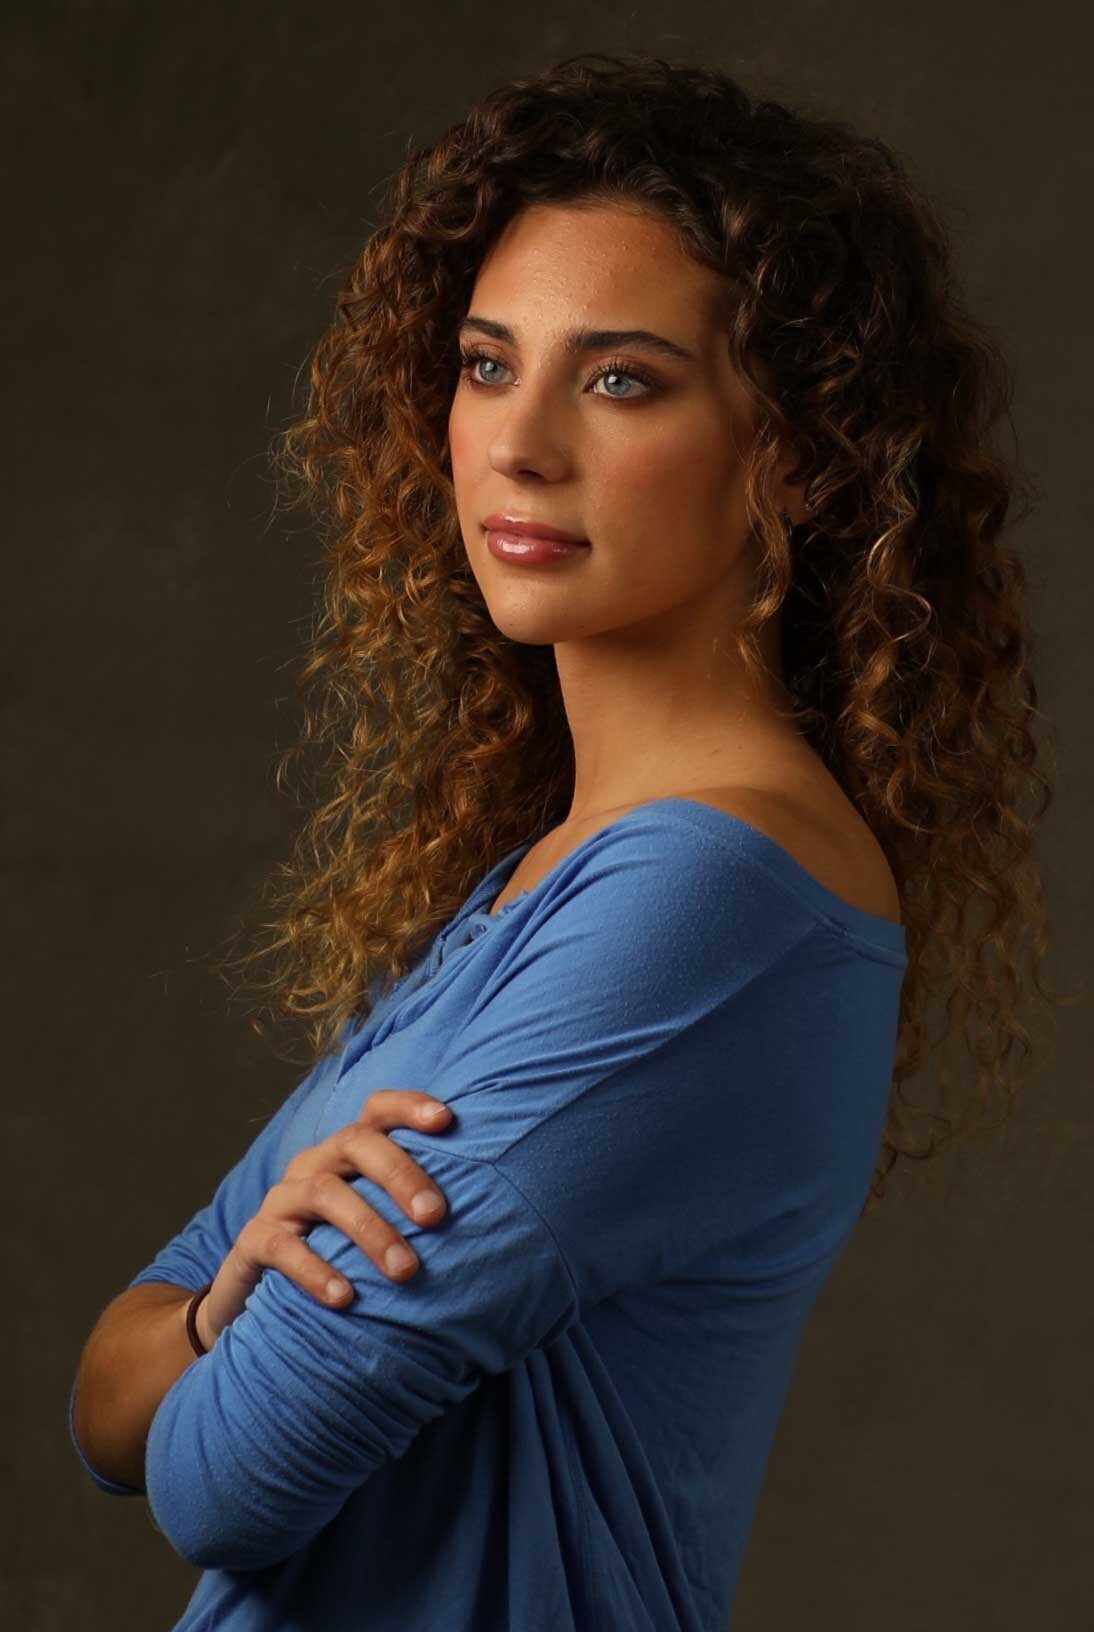 Curly haired woman crossing arms and smiling